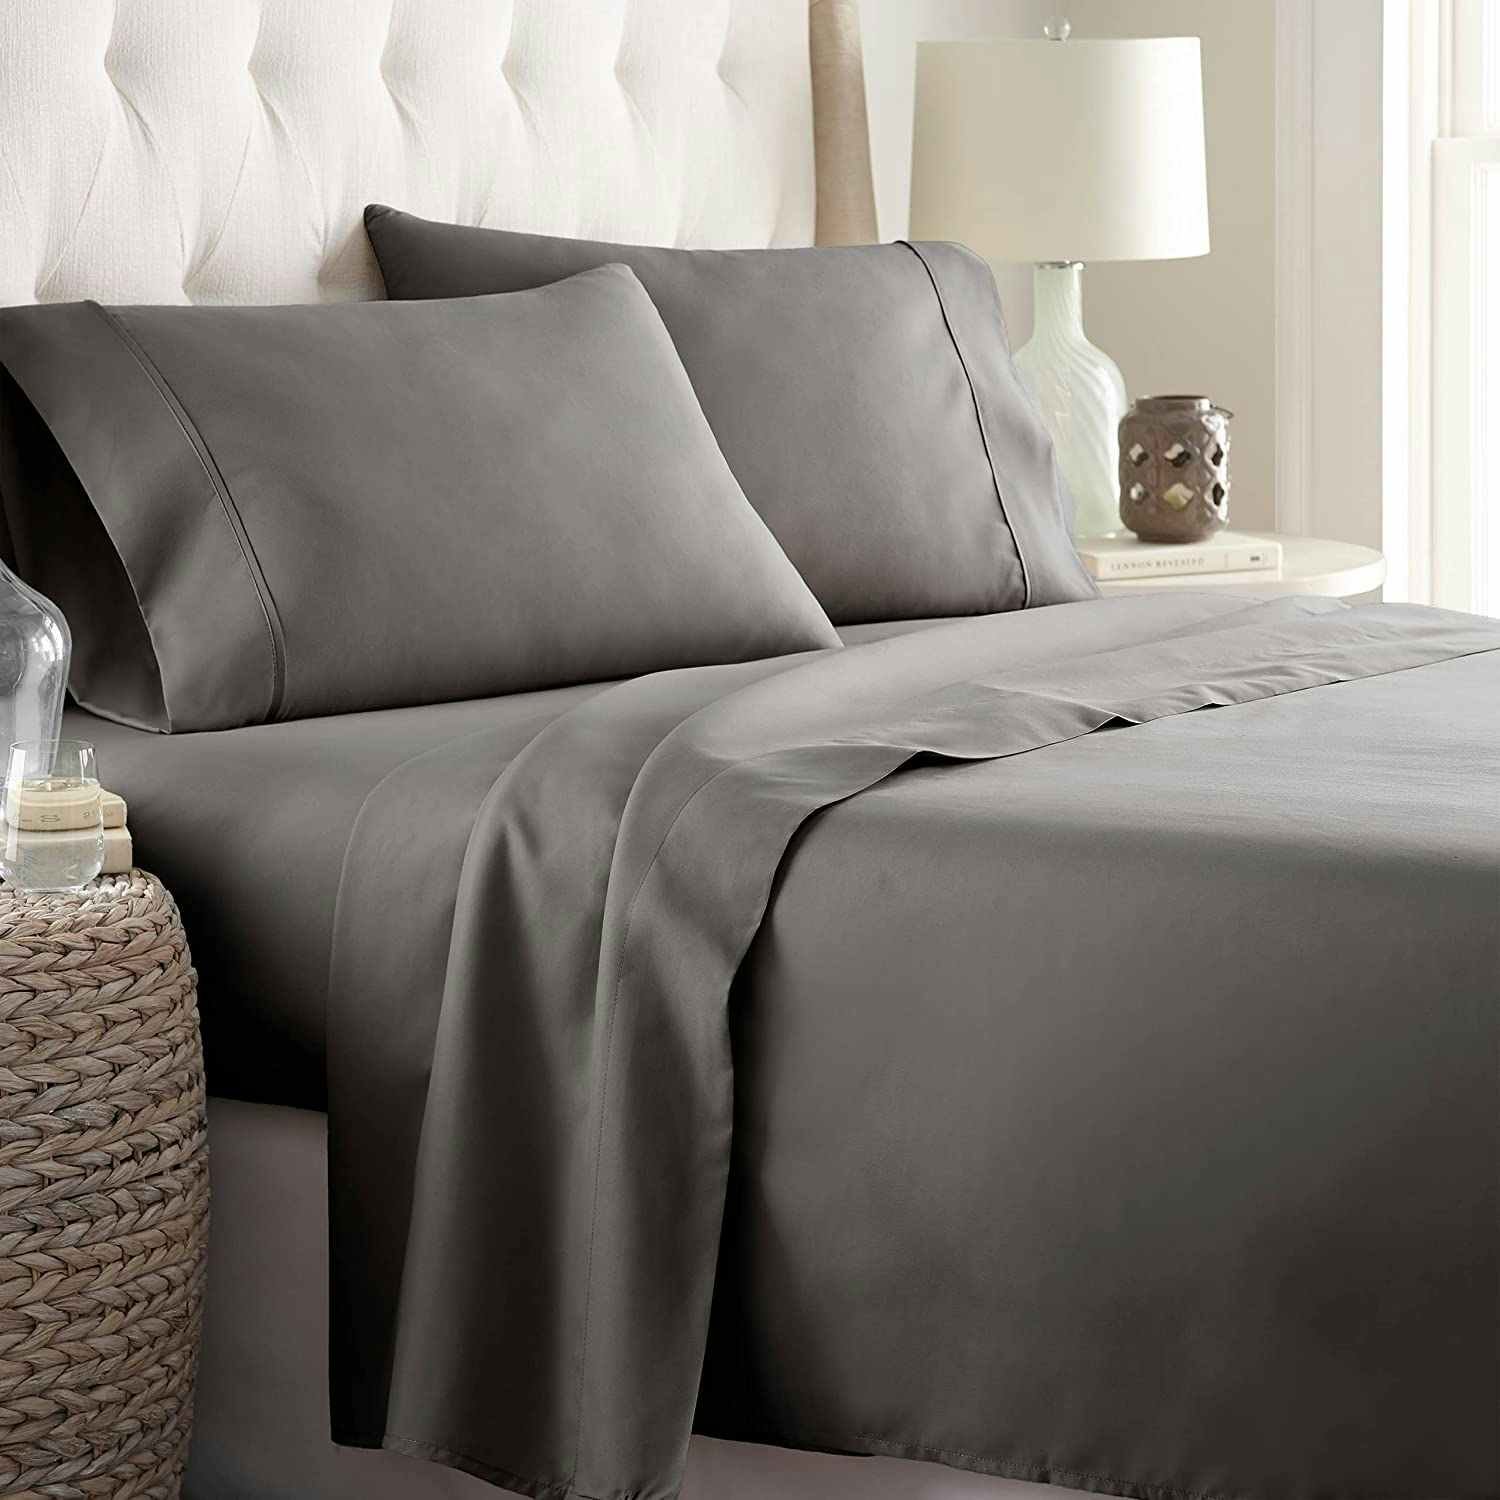 A bed with gray sheets.